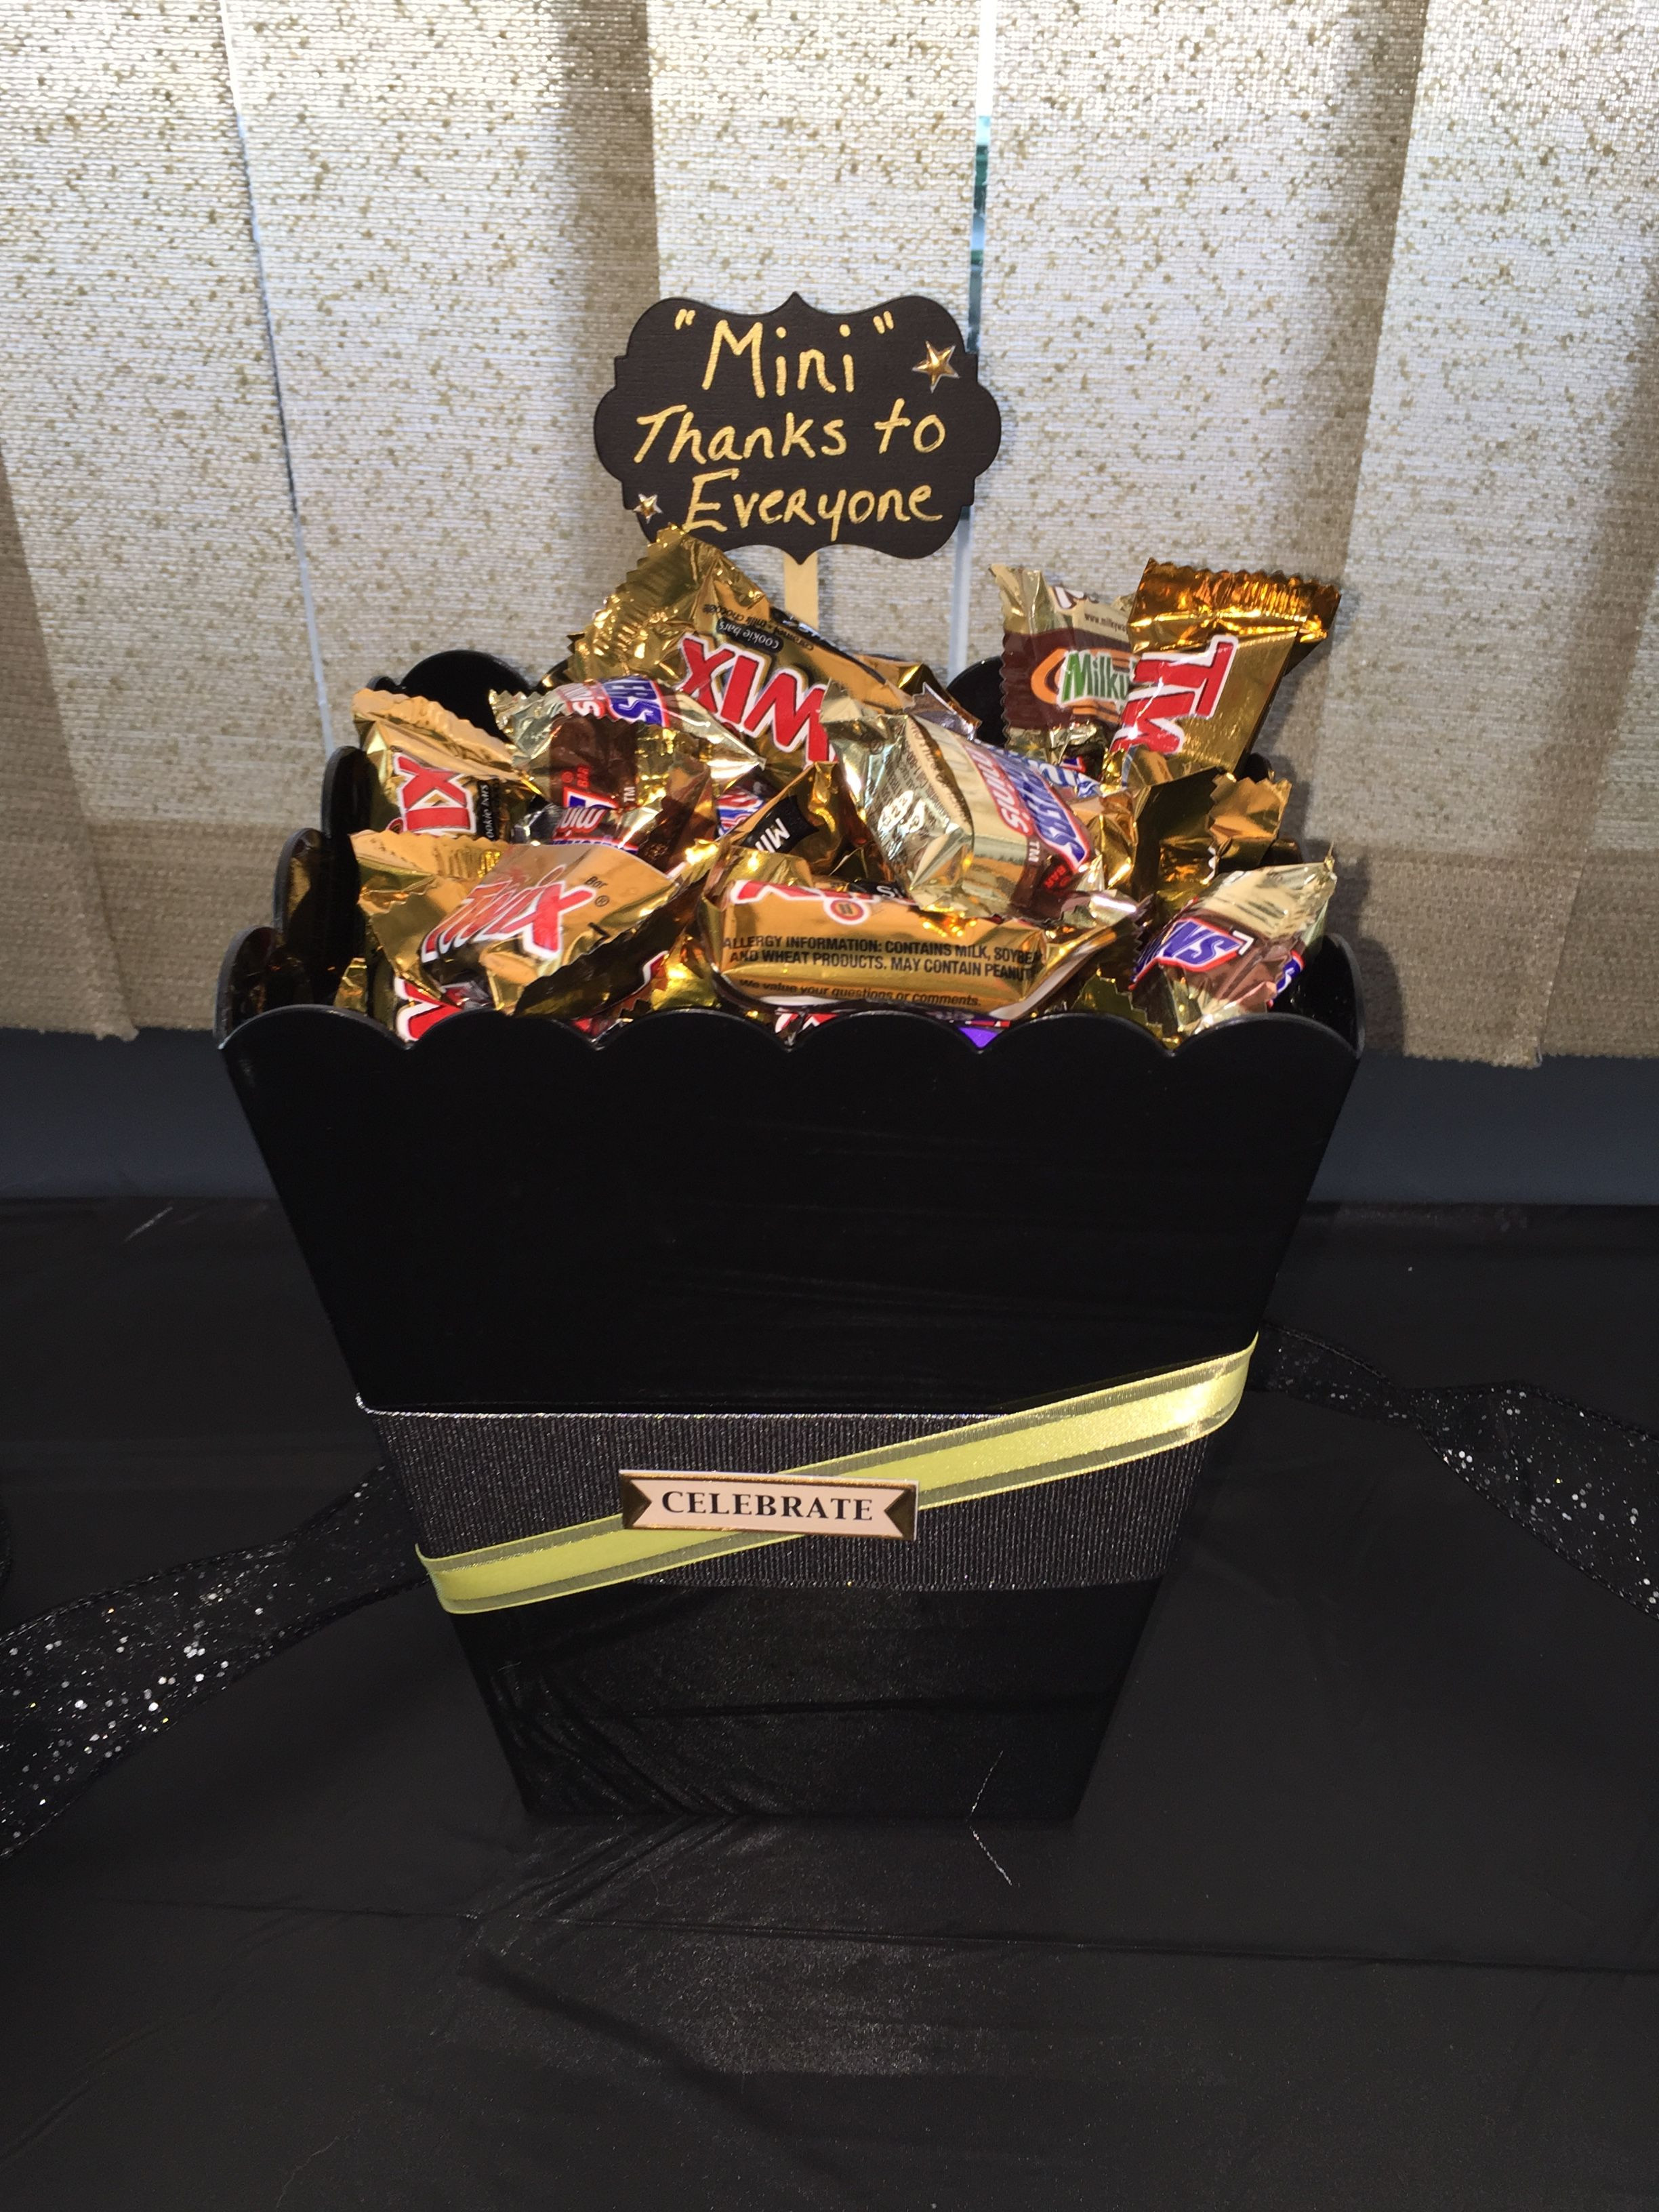 Graduation Party Candy Table Ideas
 Pin by Vanessa Figueroa on Graduation Party Ideas